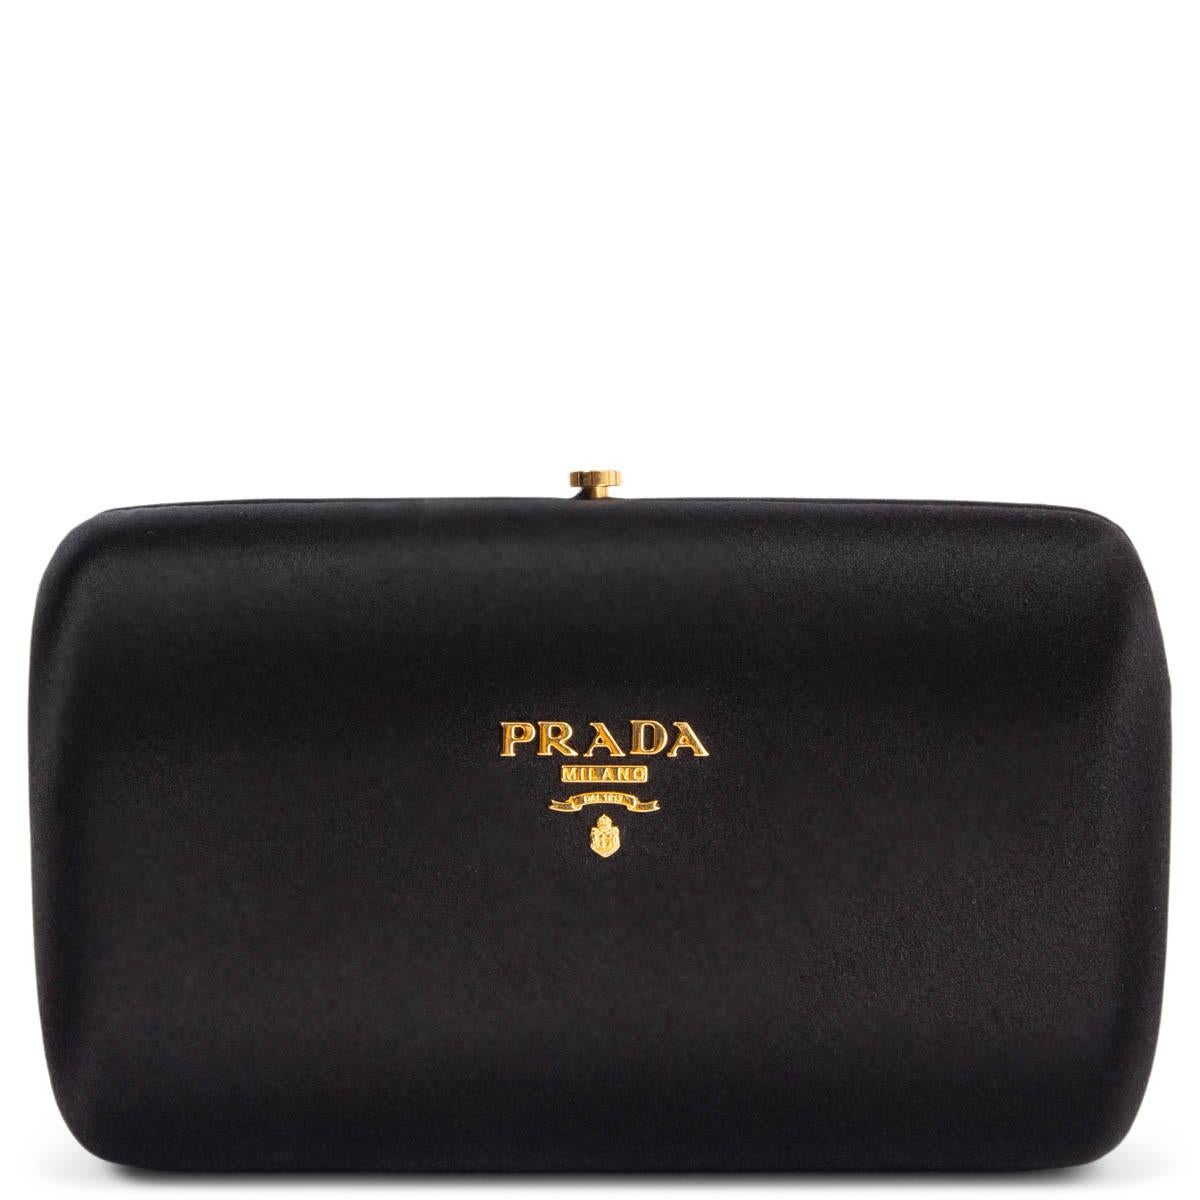 100% authentic Prada box clutch in black silk satin with gold-tone metal logo engraving. Opens with a frame closure to a lilac satin lined interior. Has been carried and shows some soft marks on the outside and on the lining. Overall in very good